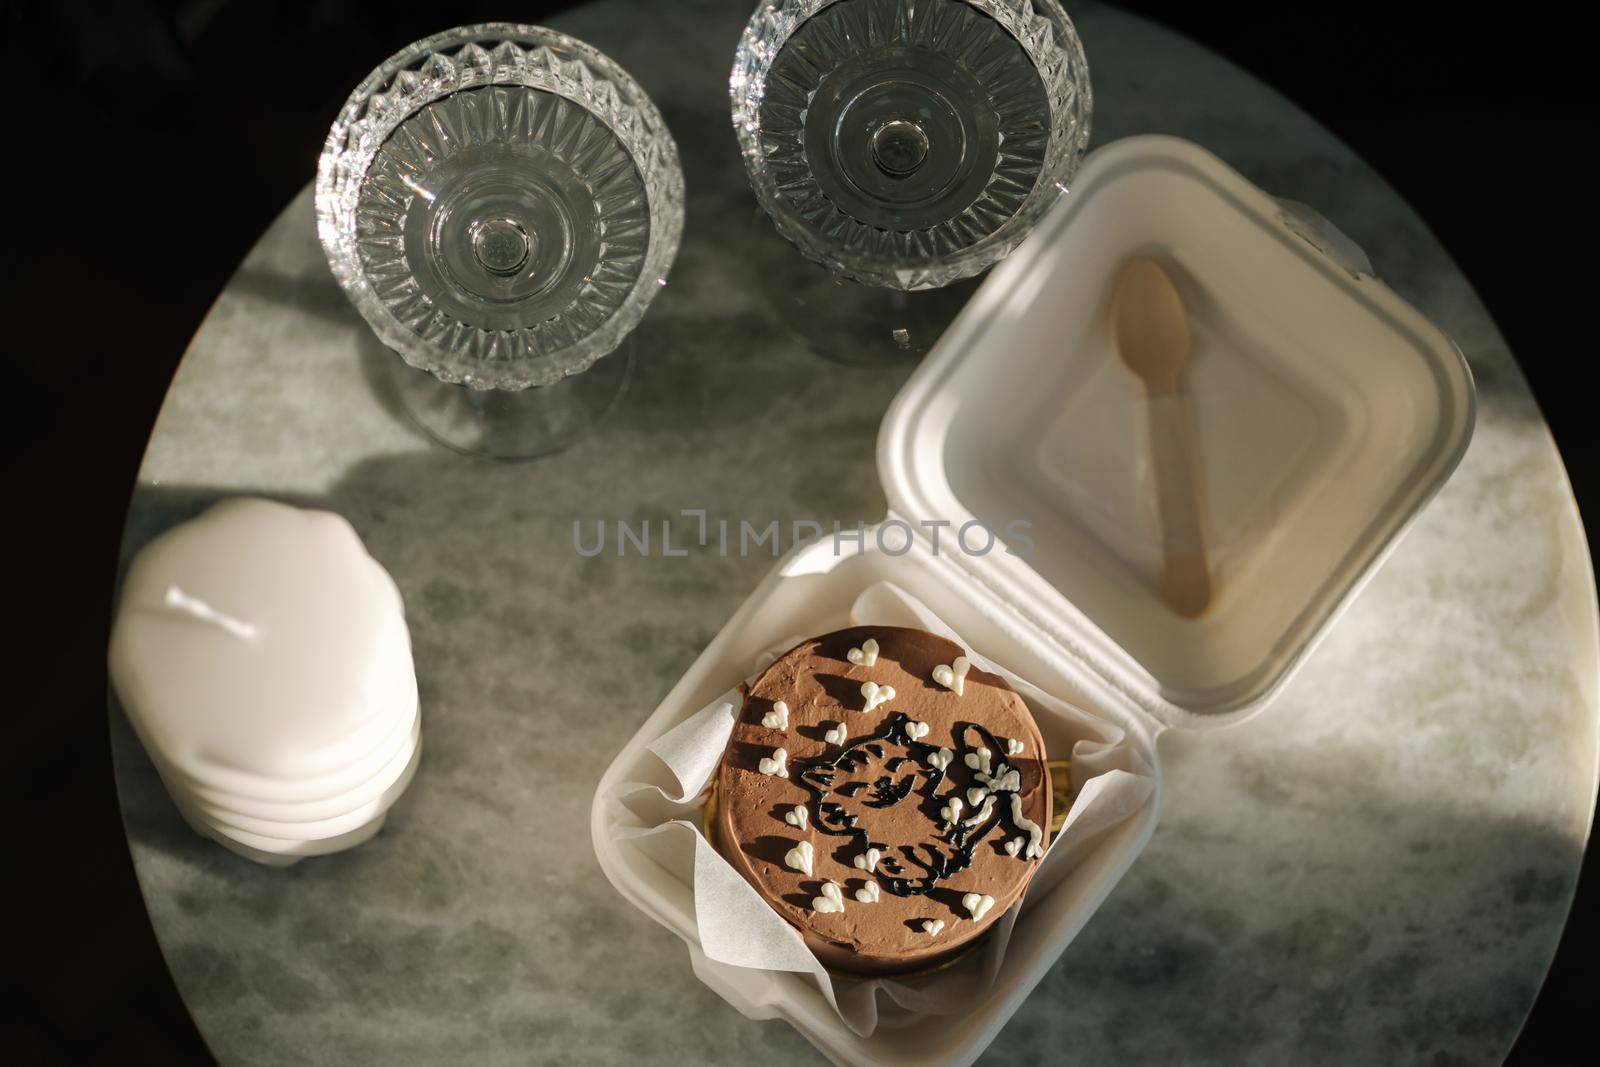 Top view of Chocolate bento cake in eco box with wooden spoon. White candle and chmpagne glasses on luzury marble table.